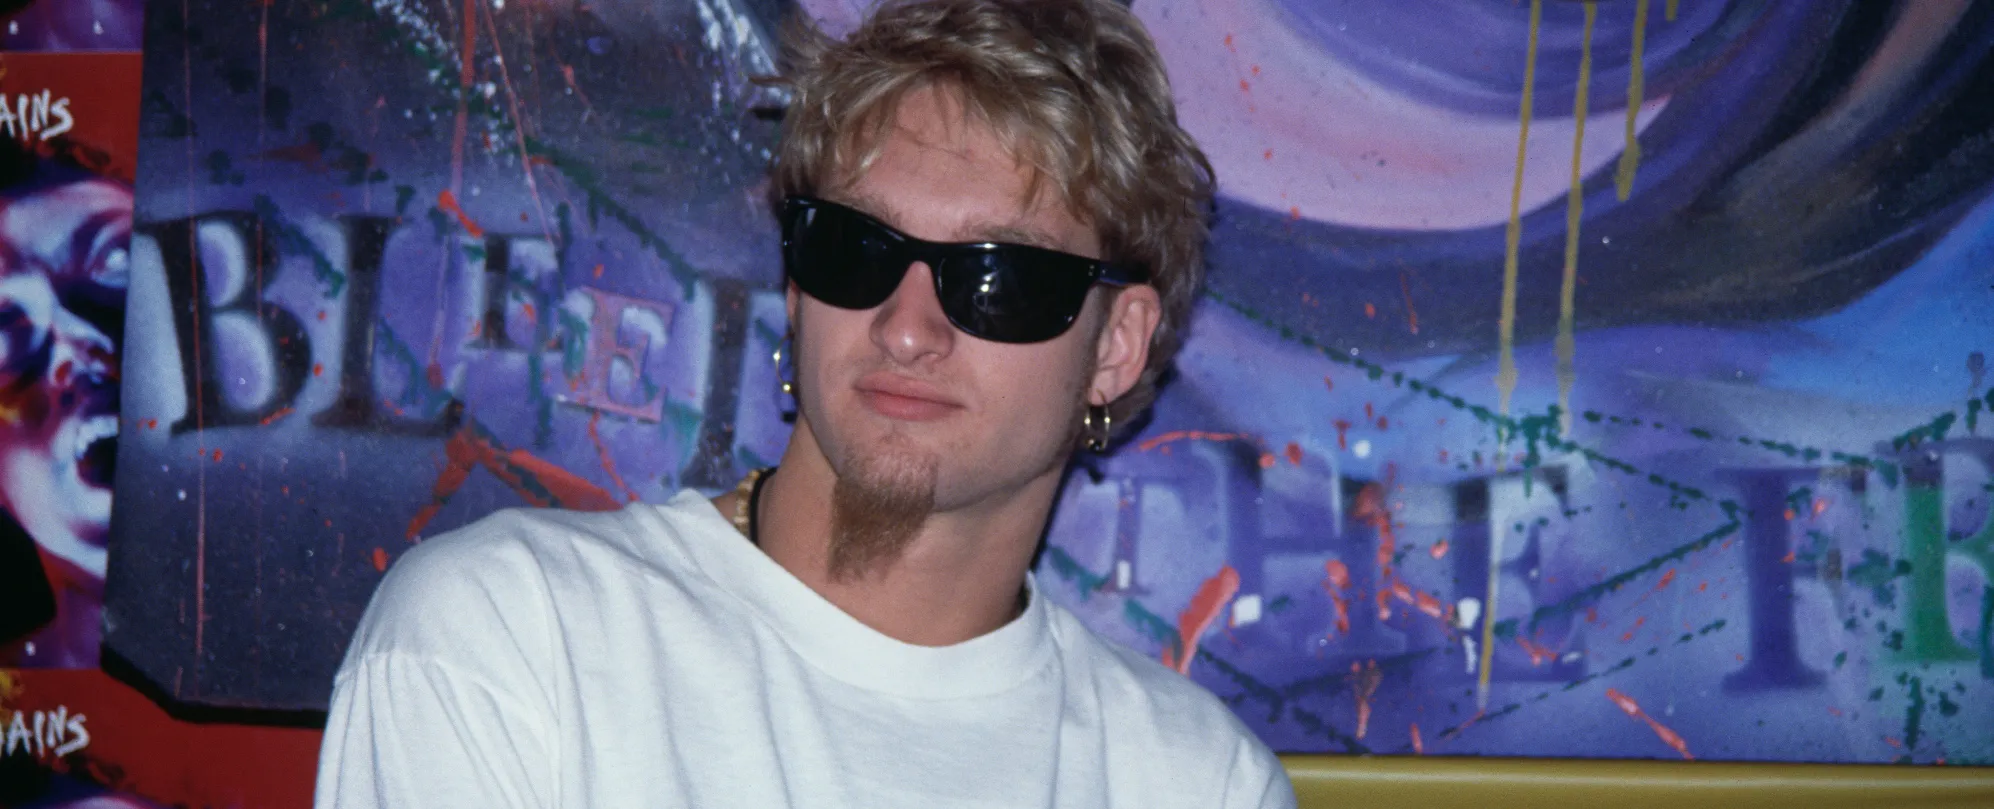 3 Songs You Didn’t Know Tragic Grunge Icon Layne Staley Wrote (Including an Alice in Chains Classic He Penned Solo)